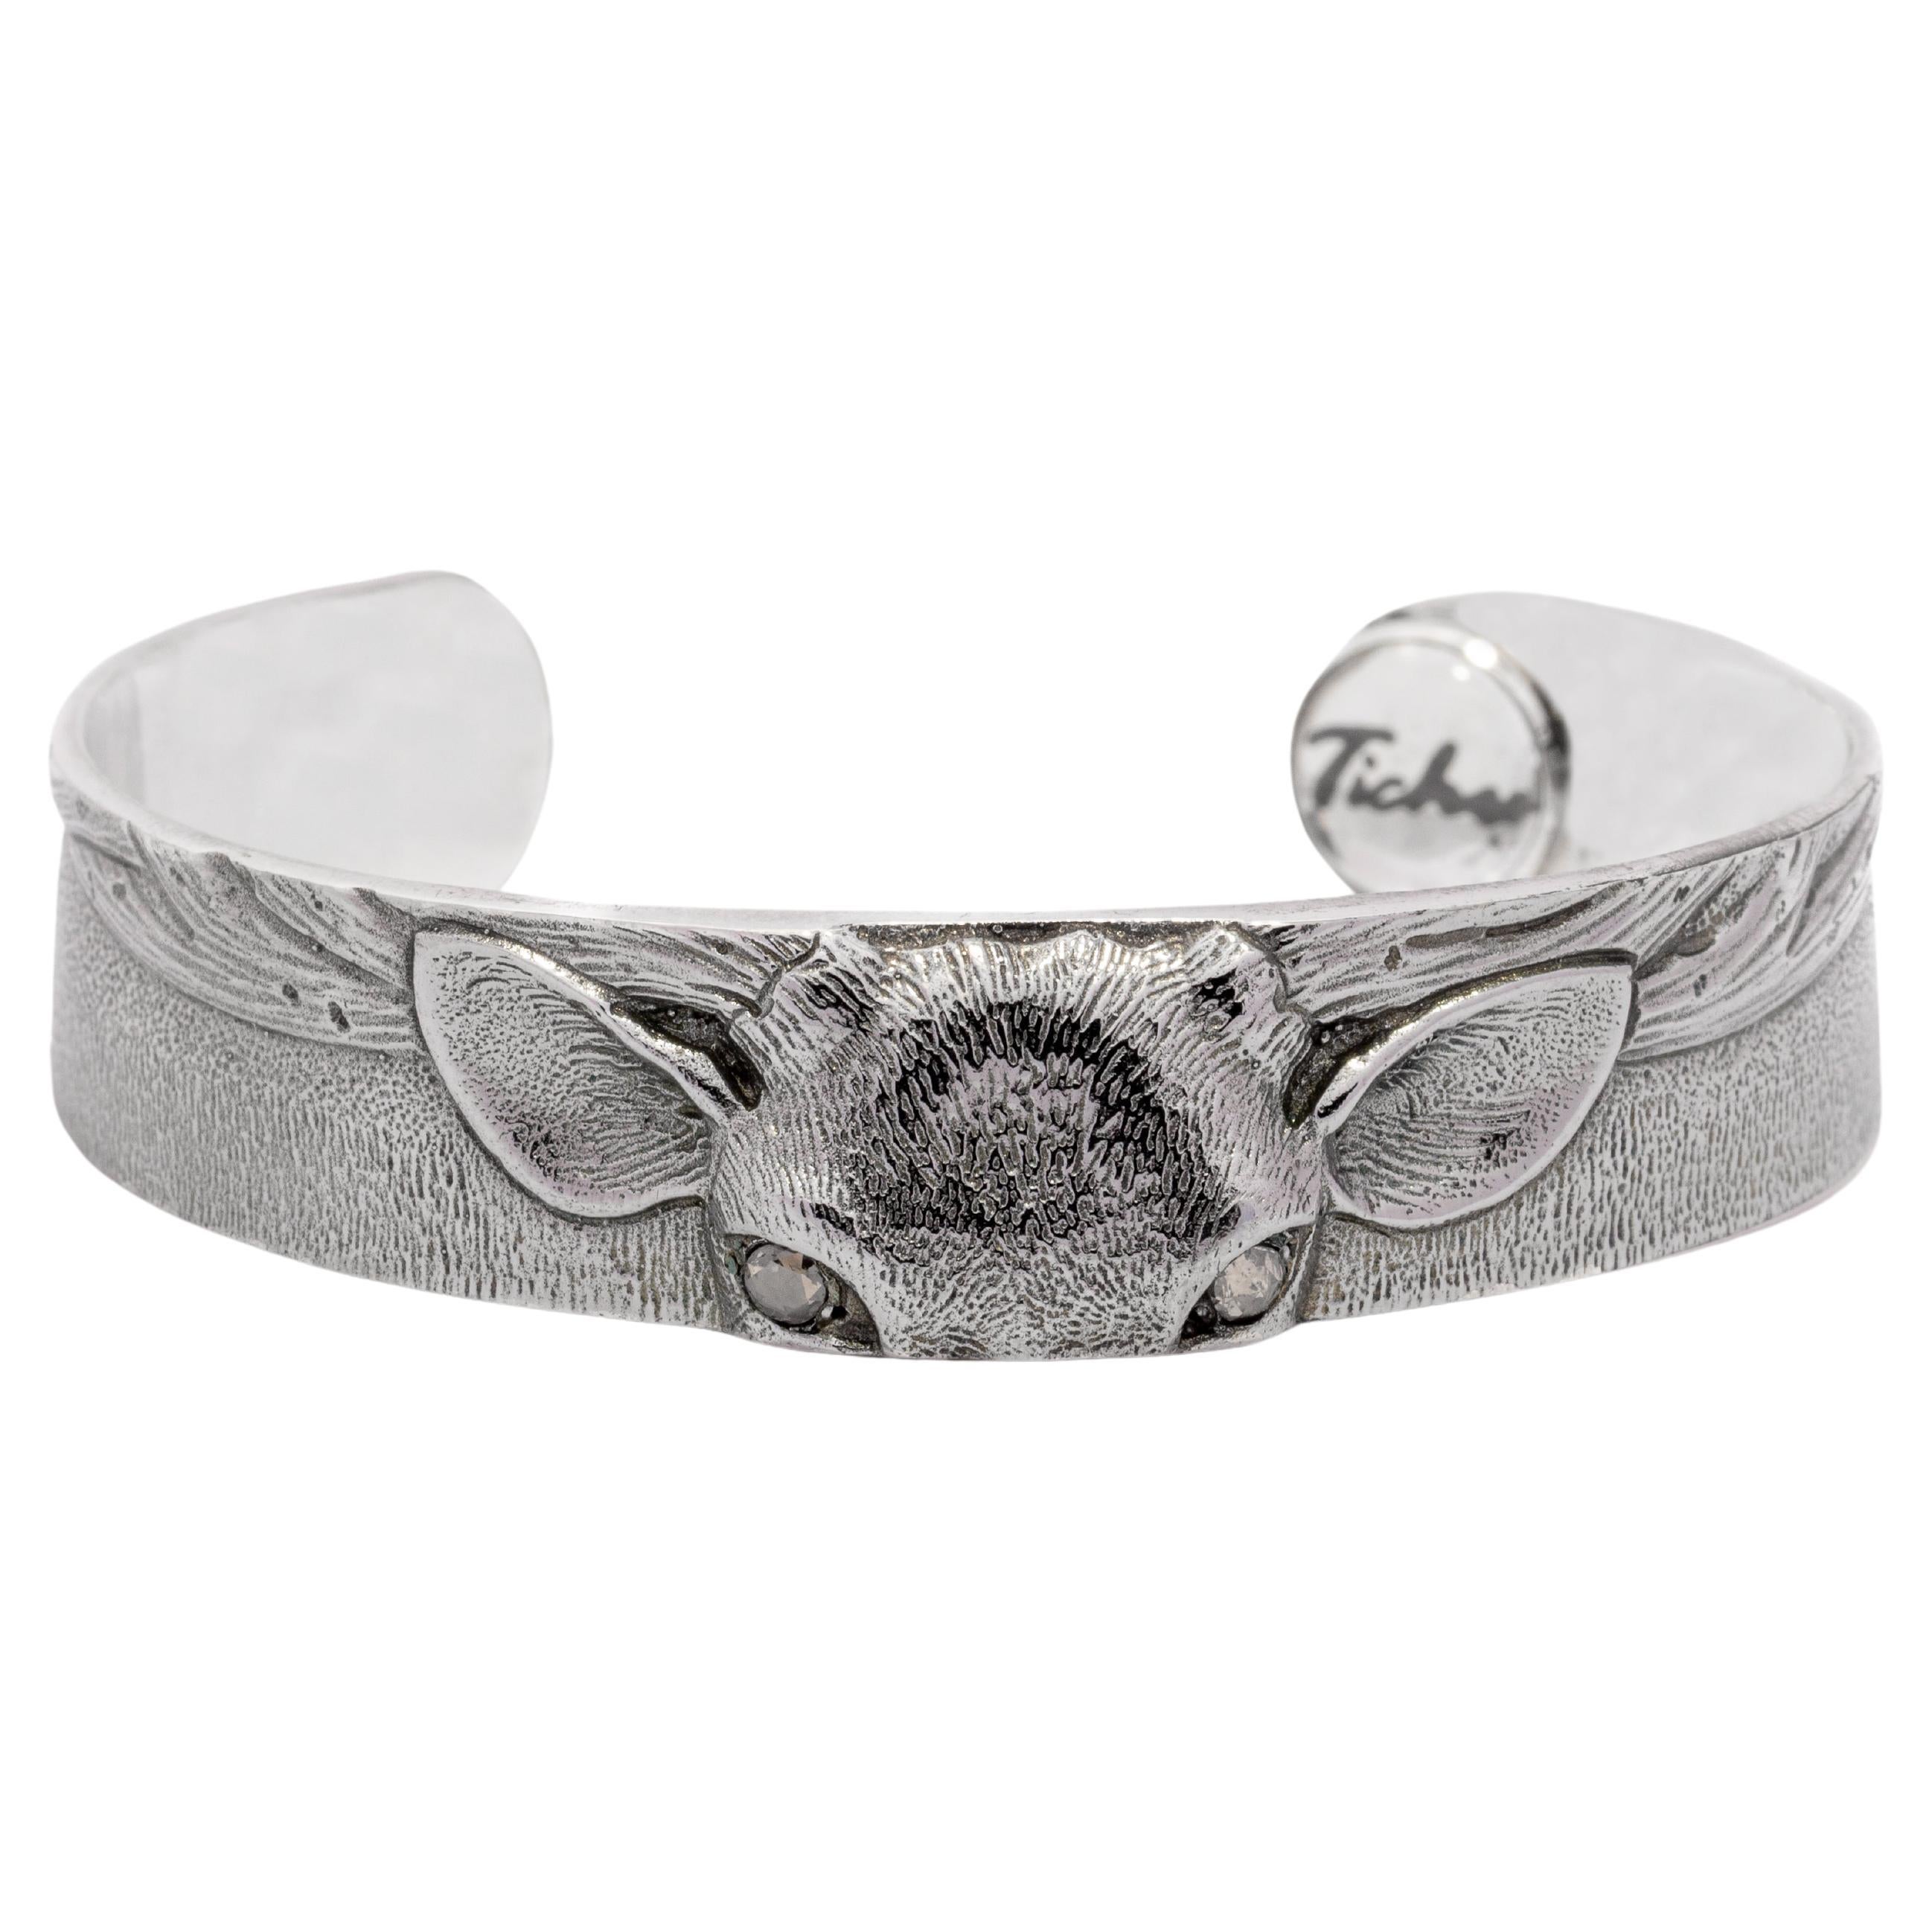 Tichu Brown Diamond Stag Eyes Cuff in Sterling Silver & Crystal Quartz 'Size M' For Sale